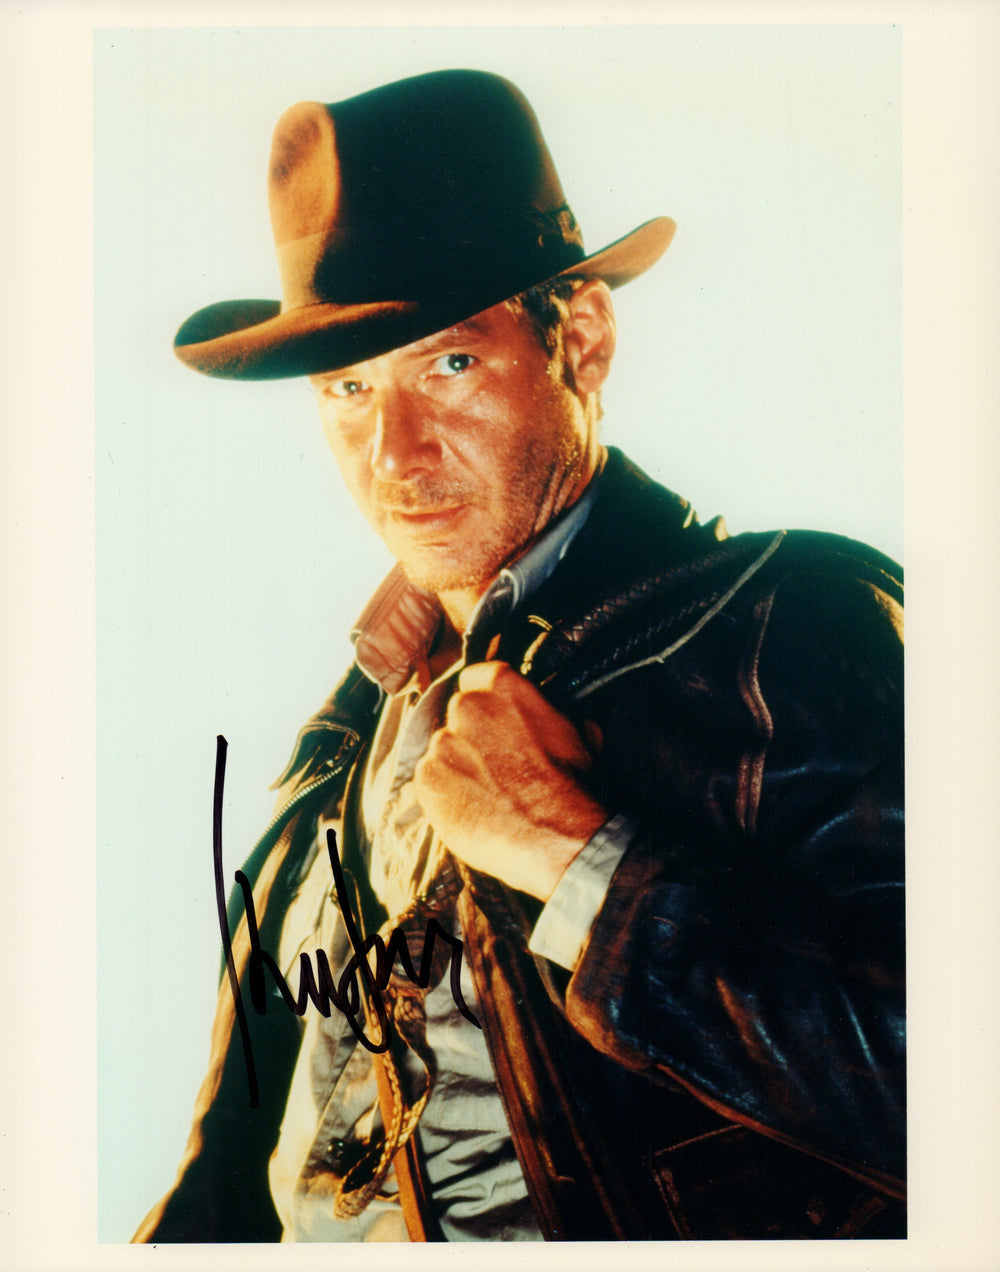 Harrison Ford as Indiana Jones in Indiana Jones and The Last Crusade Signed 8x10 Photo